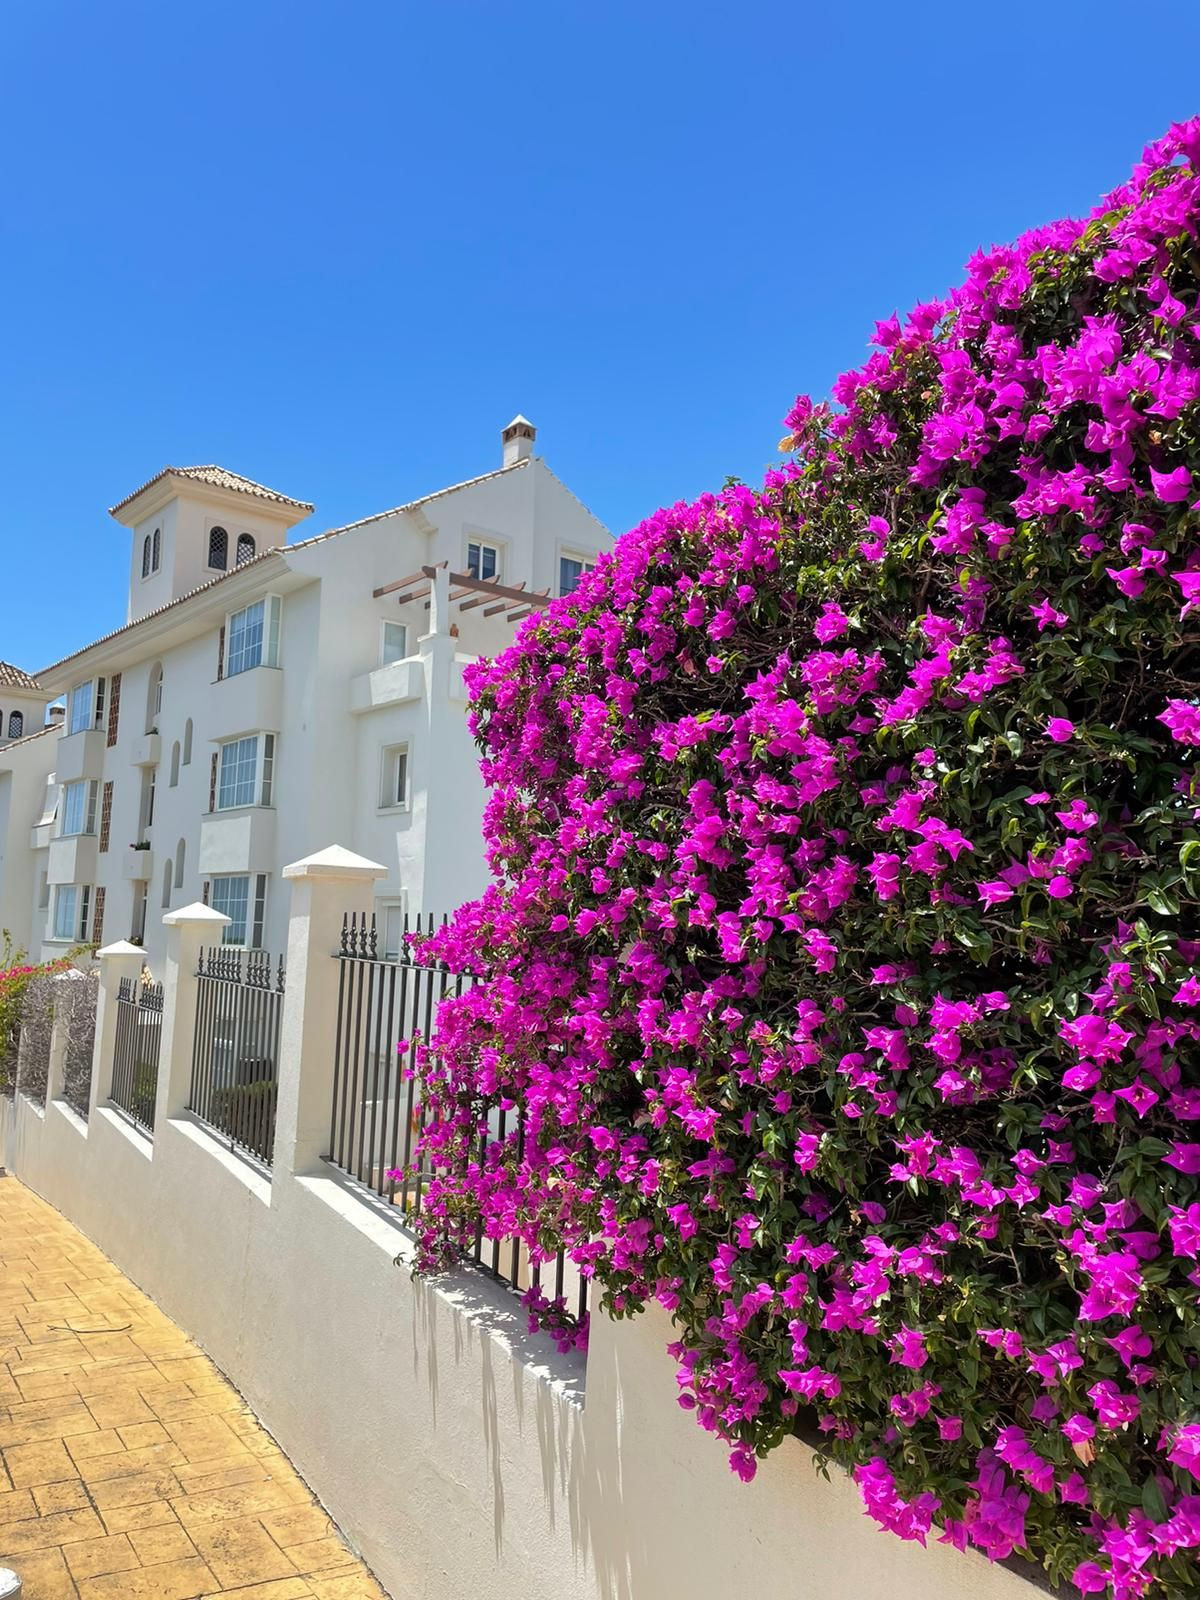 Albatros.

Two-bedroom groundfloor apartment with stunning sea and mountain views in Marbella ', Spain